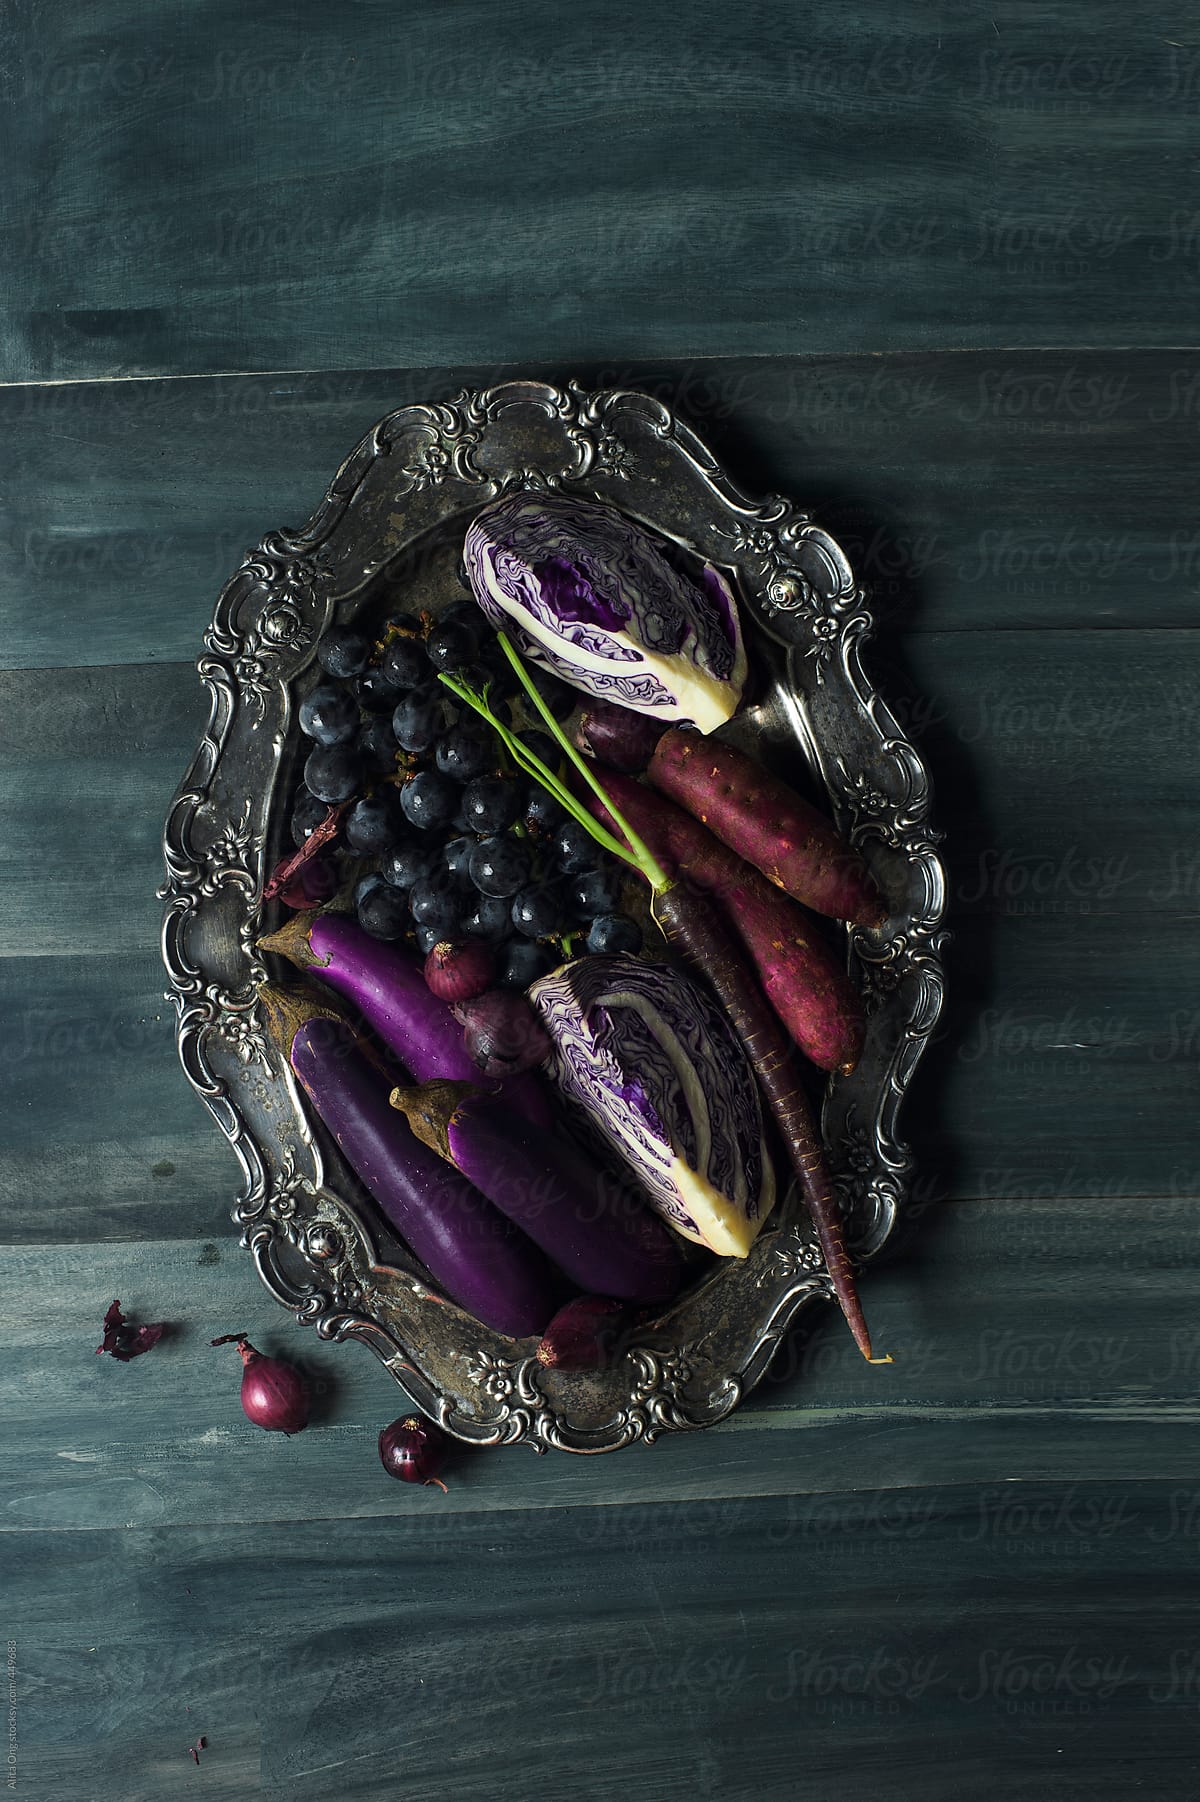 Purple fruits and vegetables on rustic metal tray